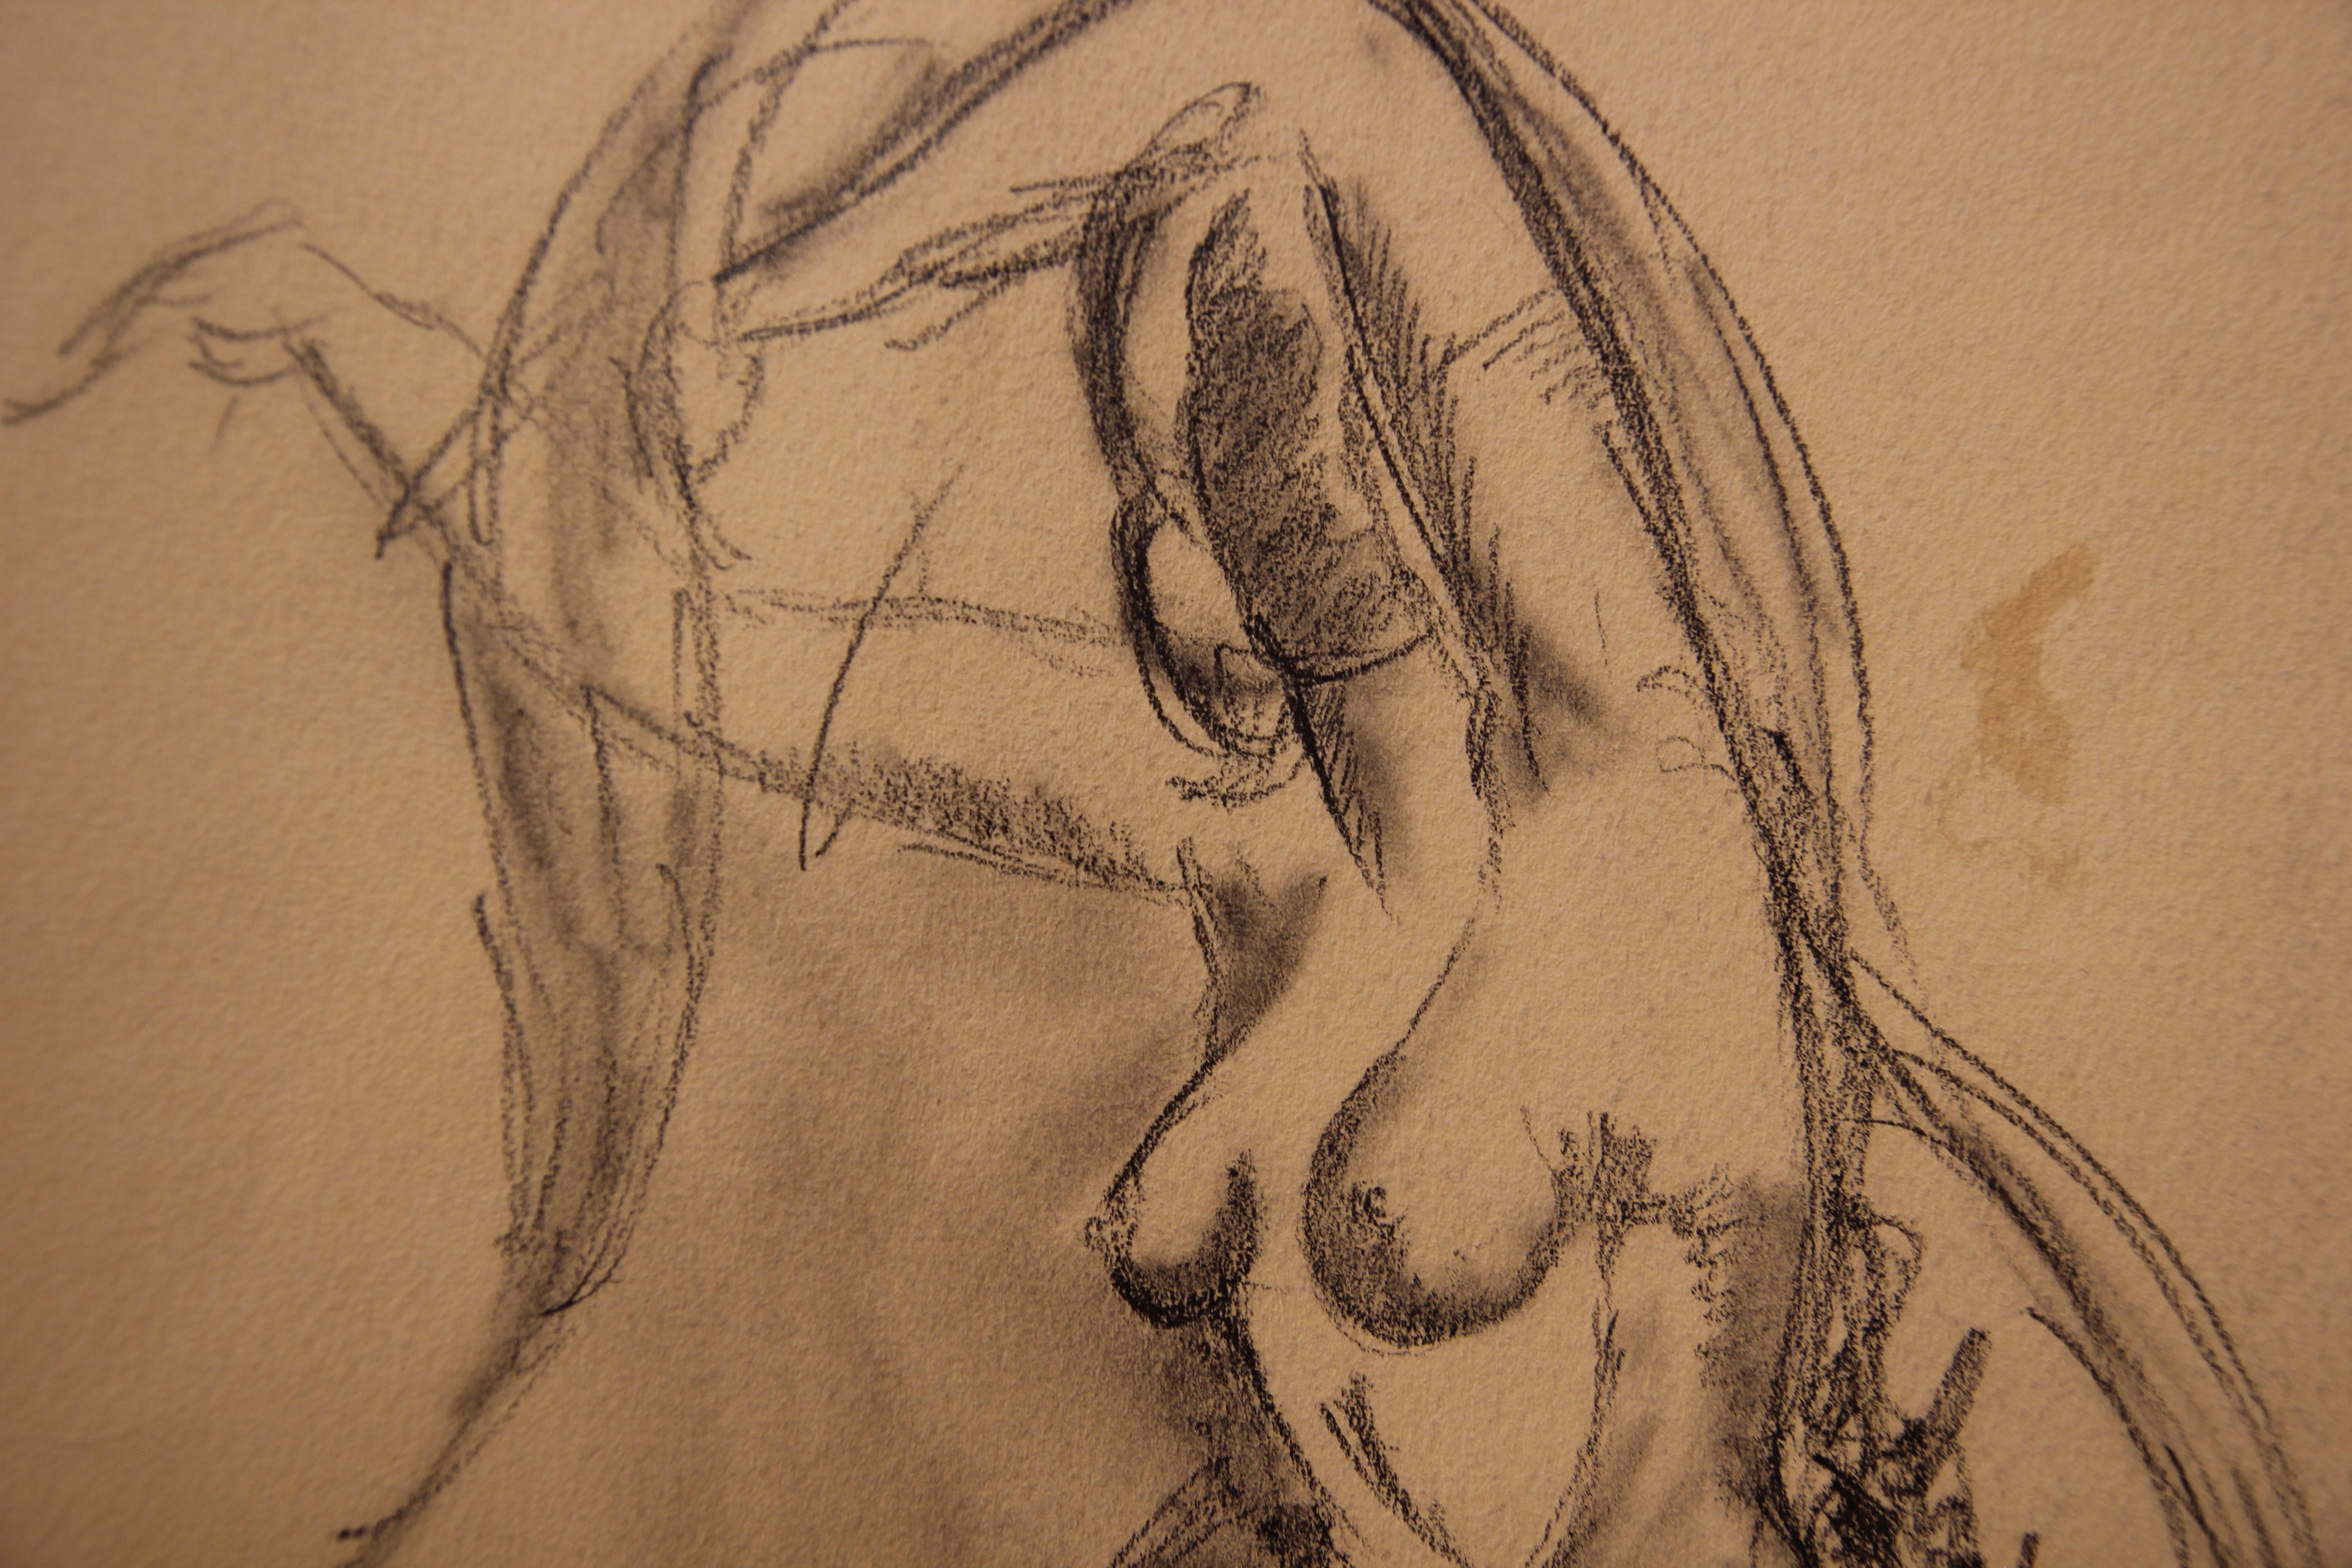 Figurative seated nude study of a woman draping fabric around herself. The work is signed by Thierry Andre thought to be a French who was influenced by Edgar Degas. The paper is not framed.